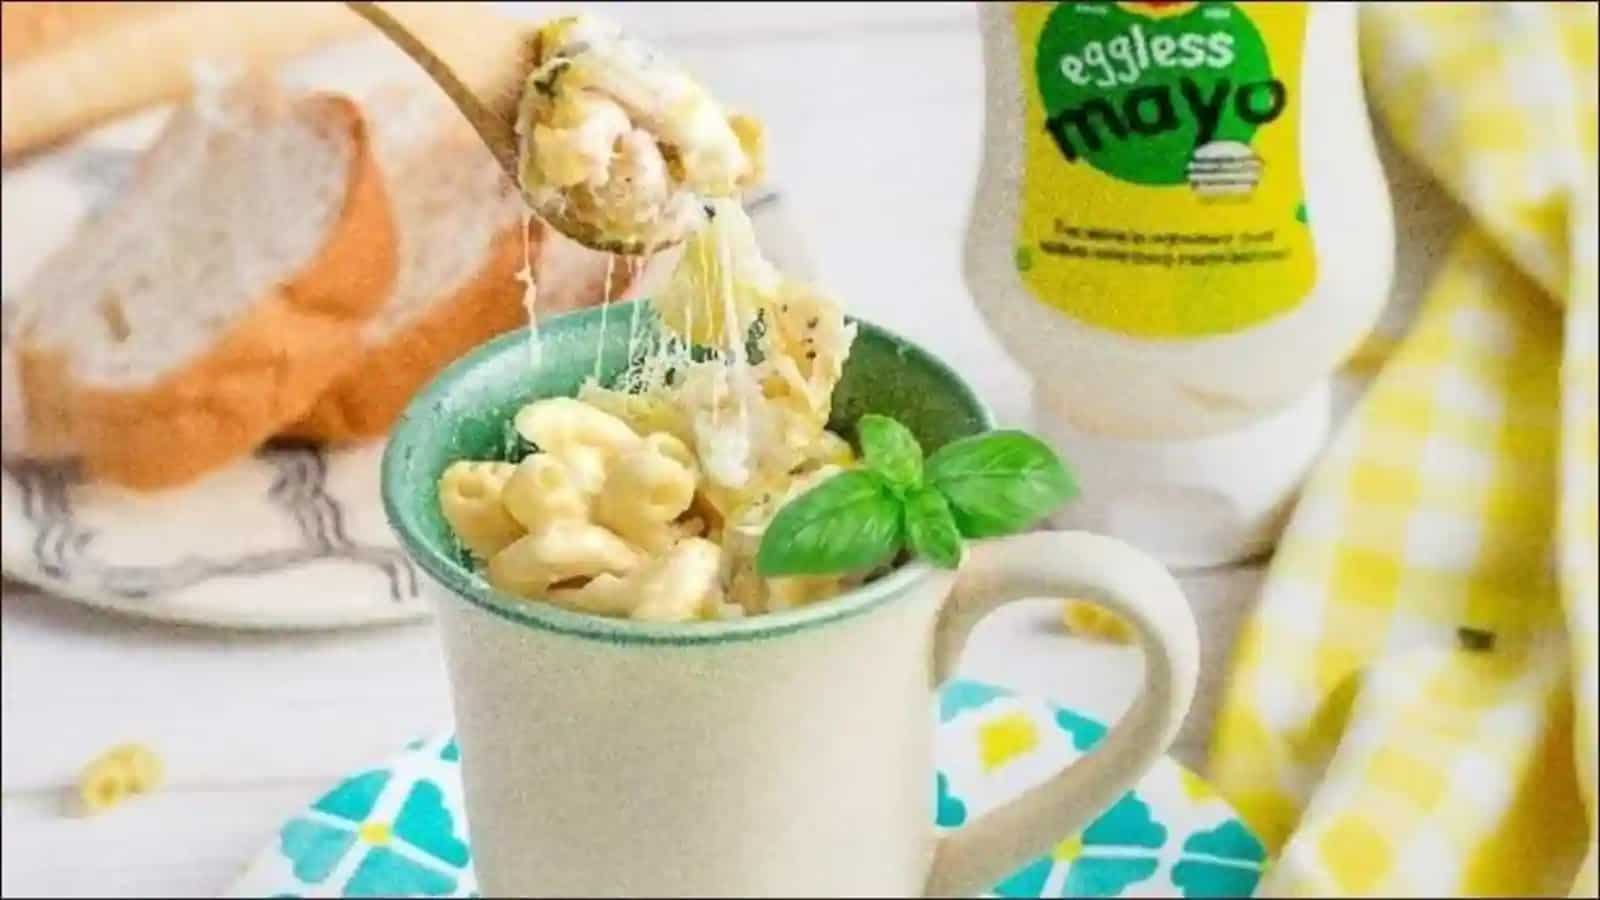 Recipe: Let Mac and Cheese in a mug paint your Tuesday blues, yellow with joy